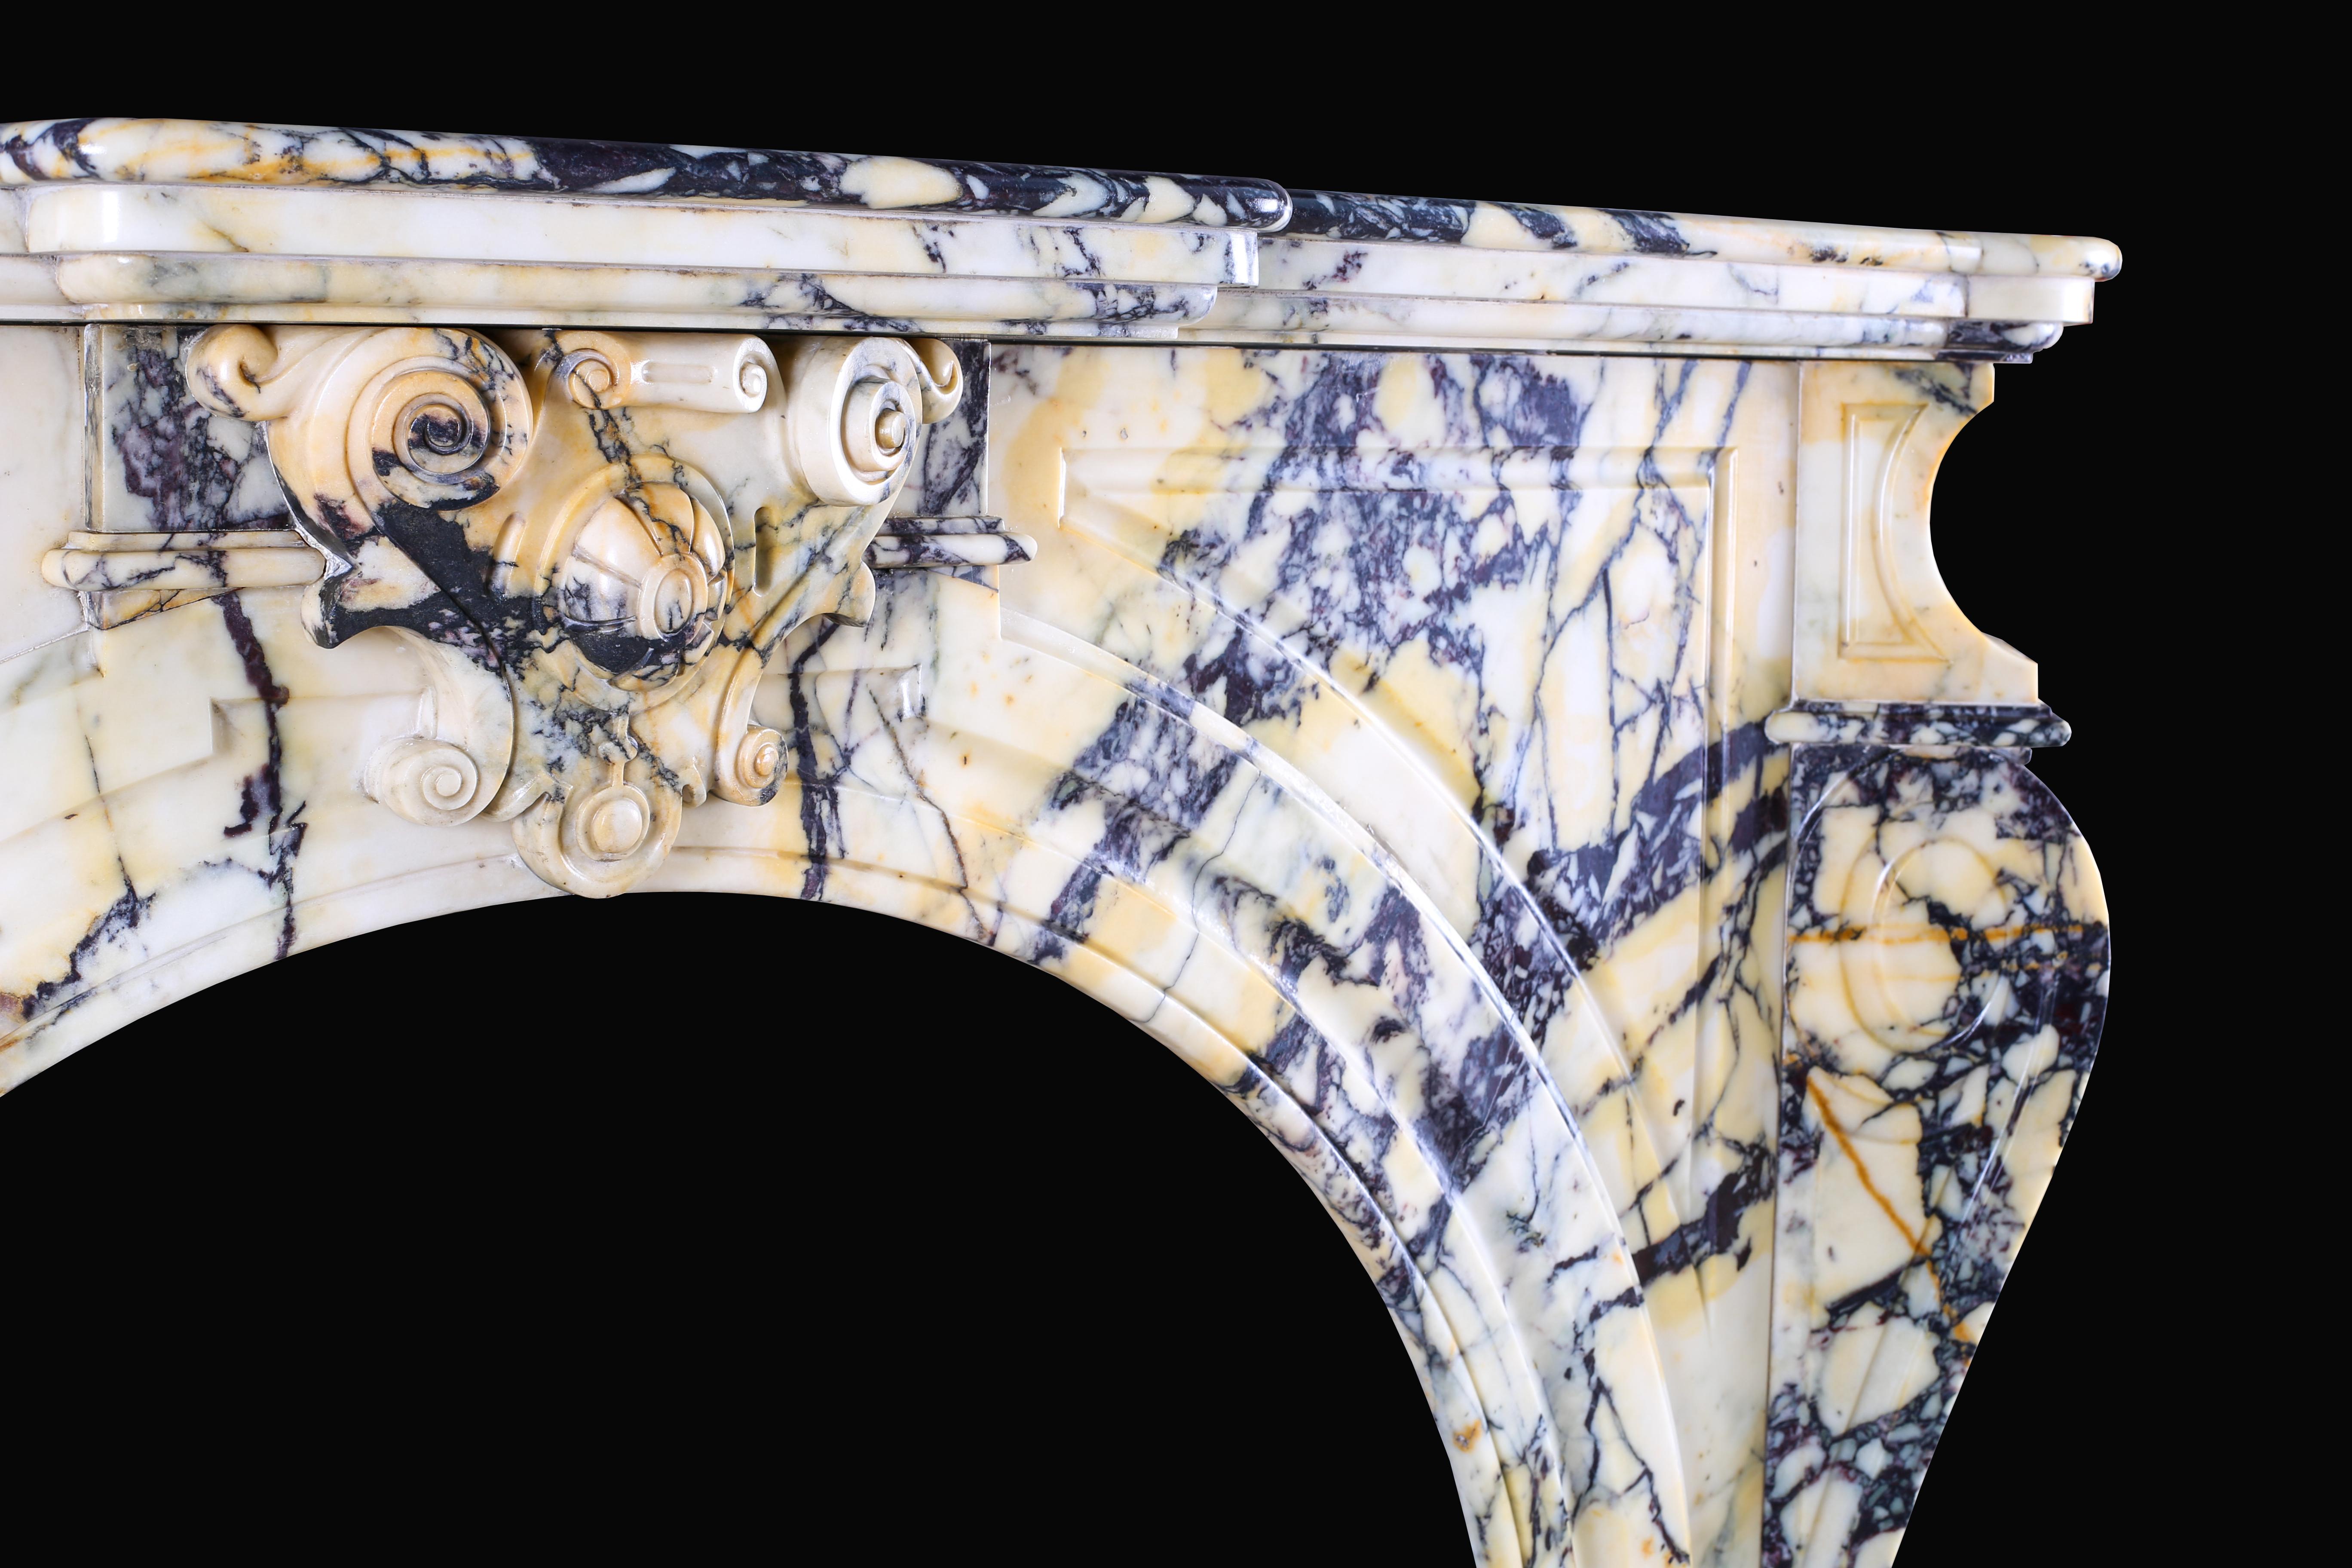 Grand Arched Pavonazza Marble Antique Chimneypiece, Belgian Mid-19th Century For Sale 2